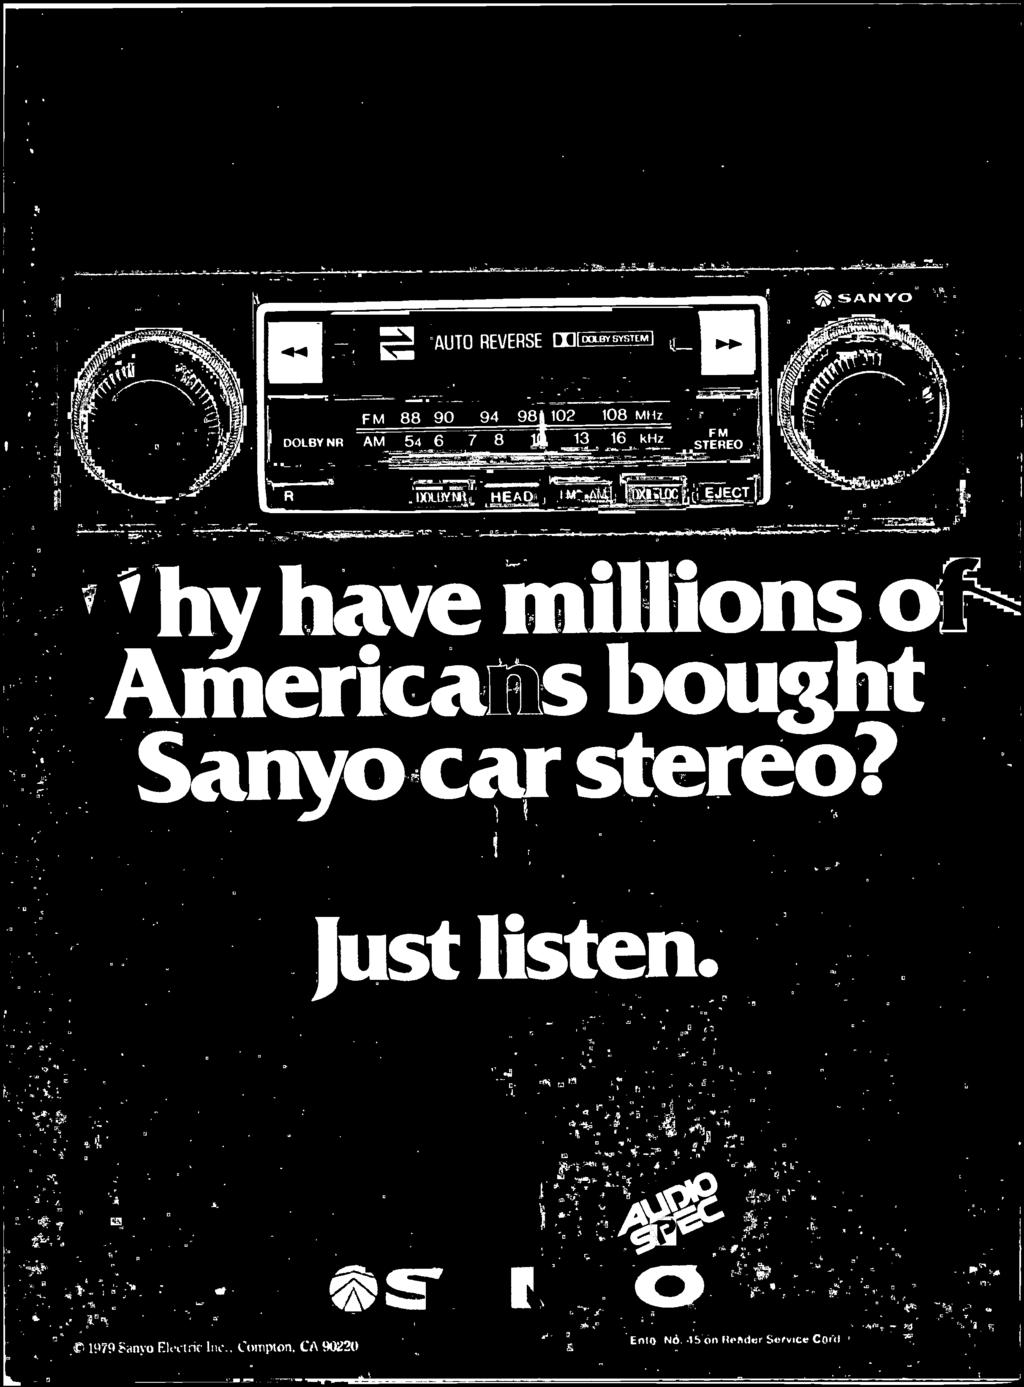 nu ions o Americans bought Sanyo carstereo?